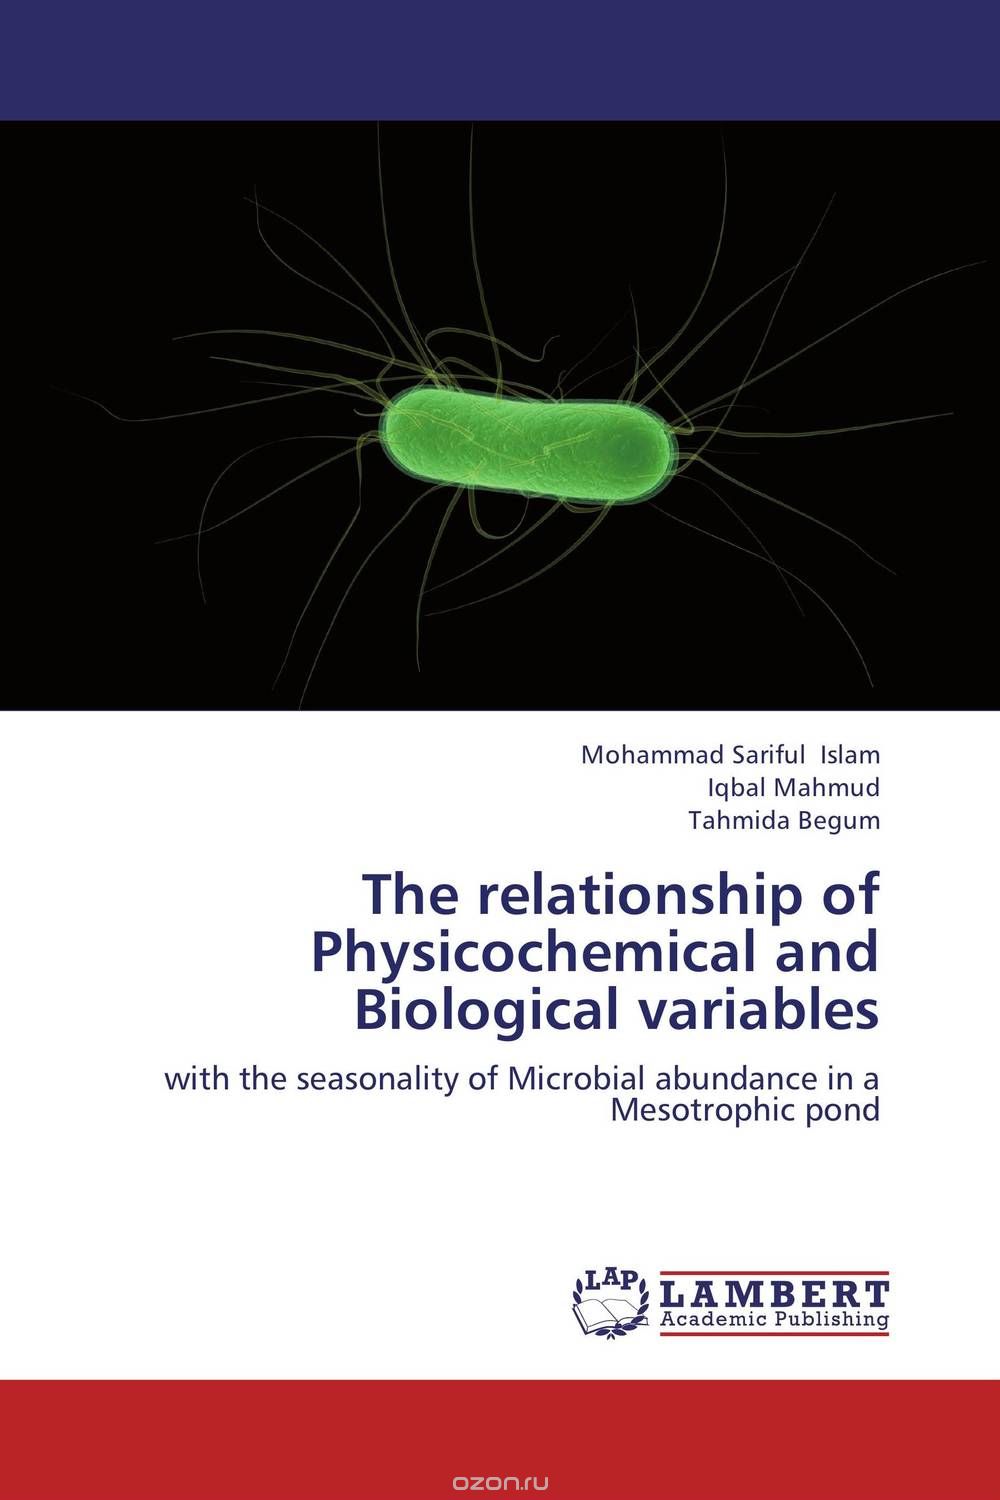 Скачать книгу "The relationship of Physicochemical and Biological variables"